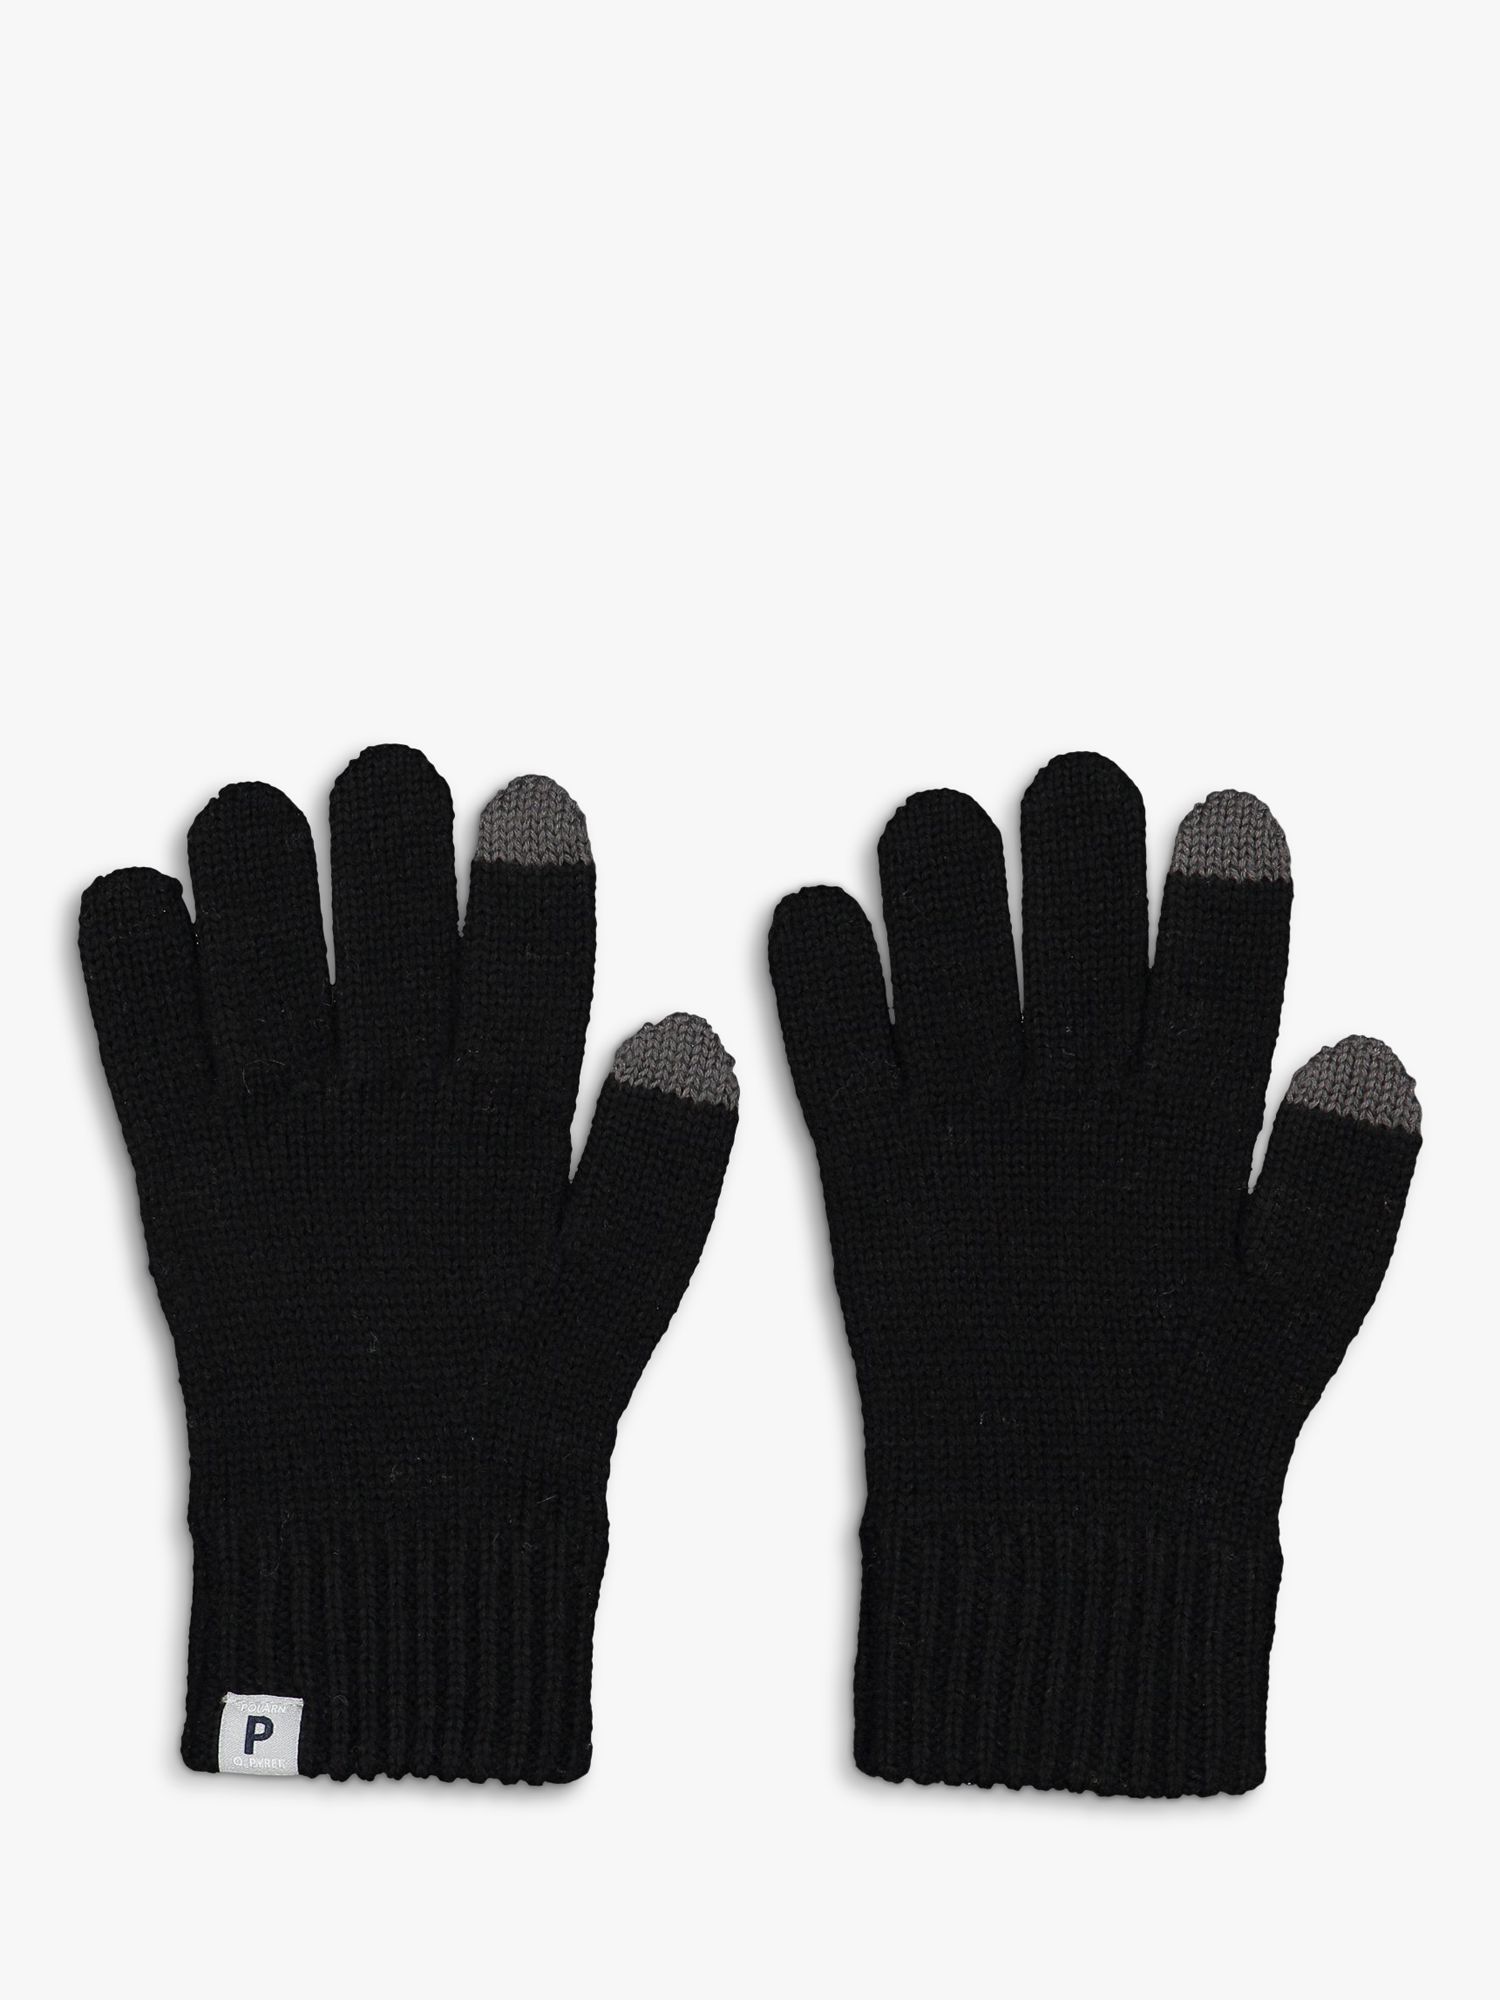 Polarn O. Pyret Kids' Wool Touch Gloves, Black, 2-4 years